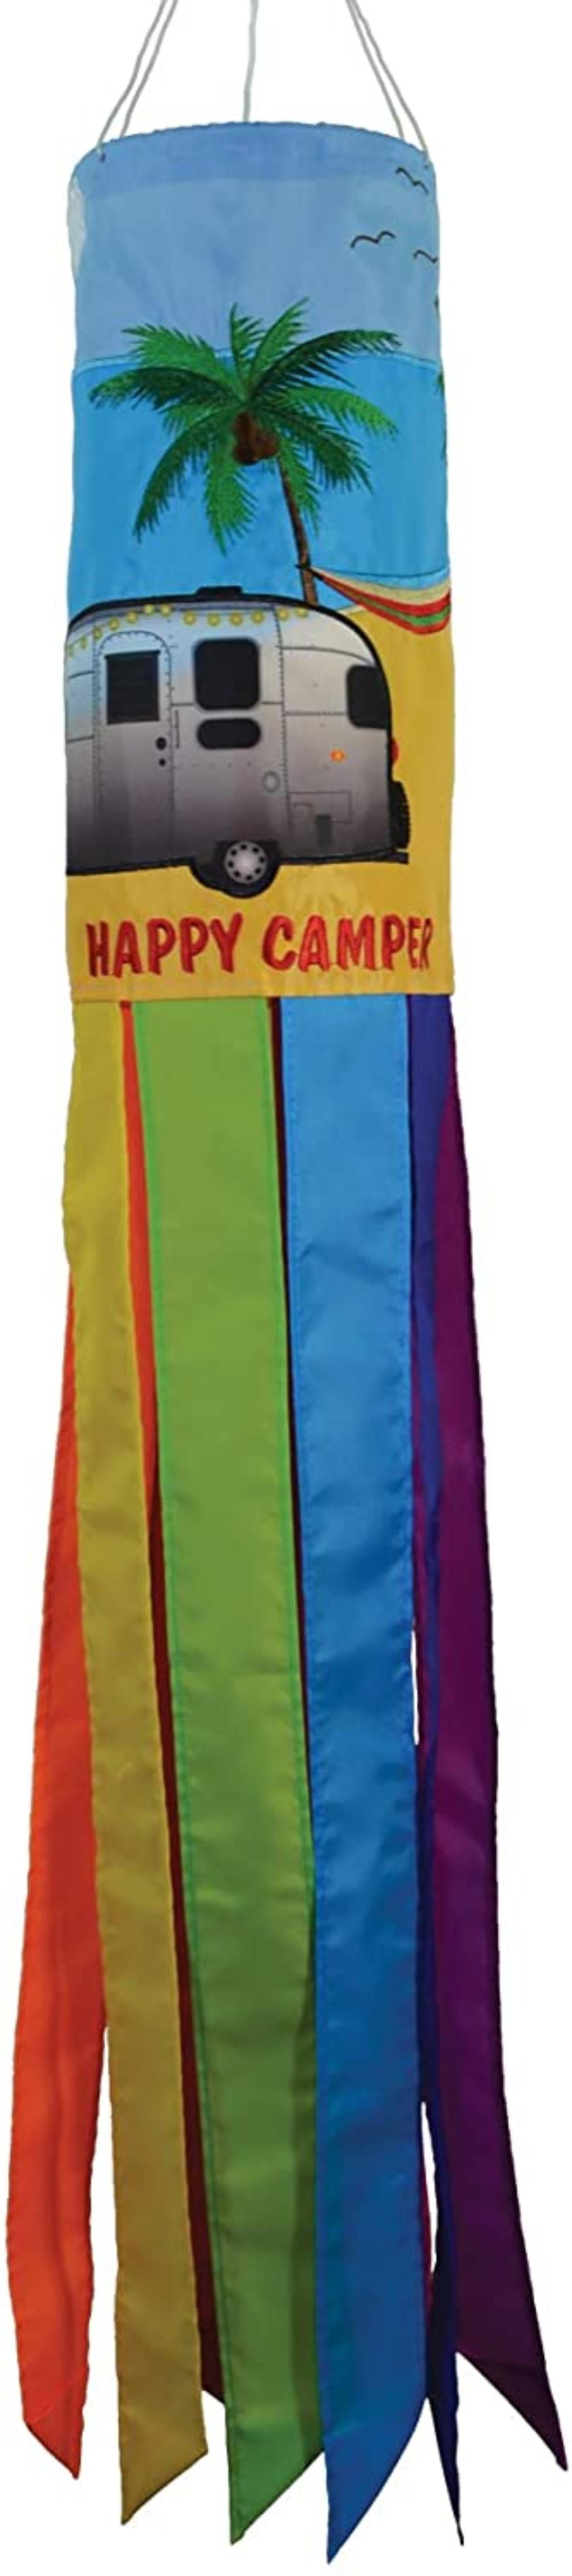 Pair of Loons Windsock with Embroidered Accents from In The Breeze 4620